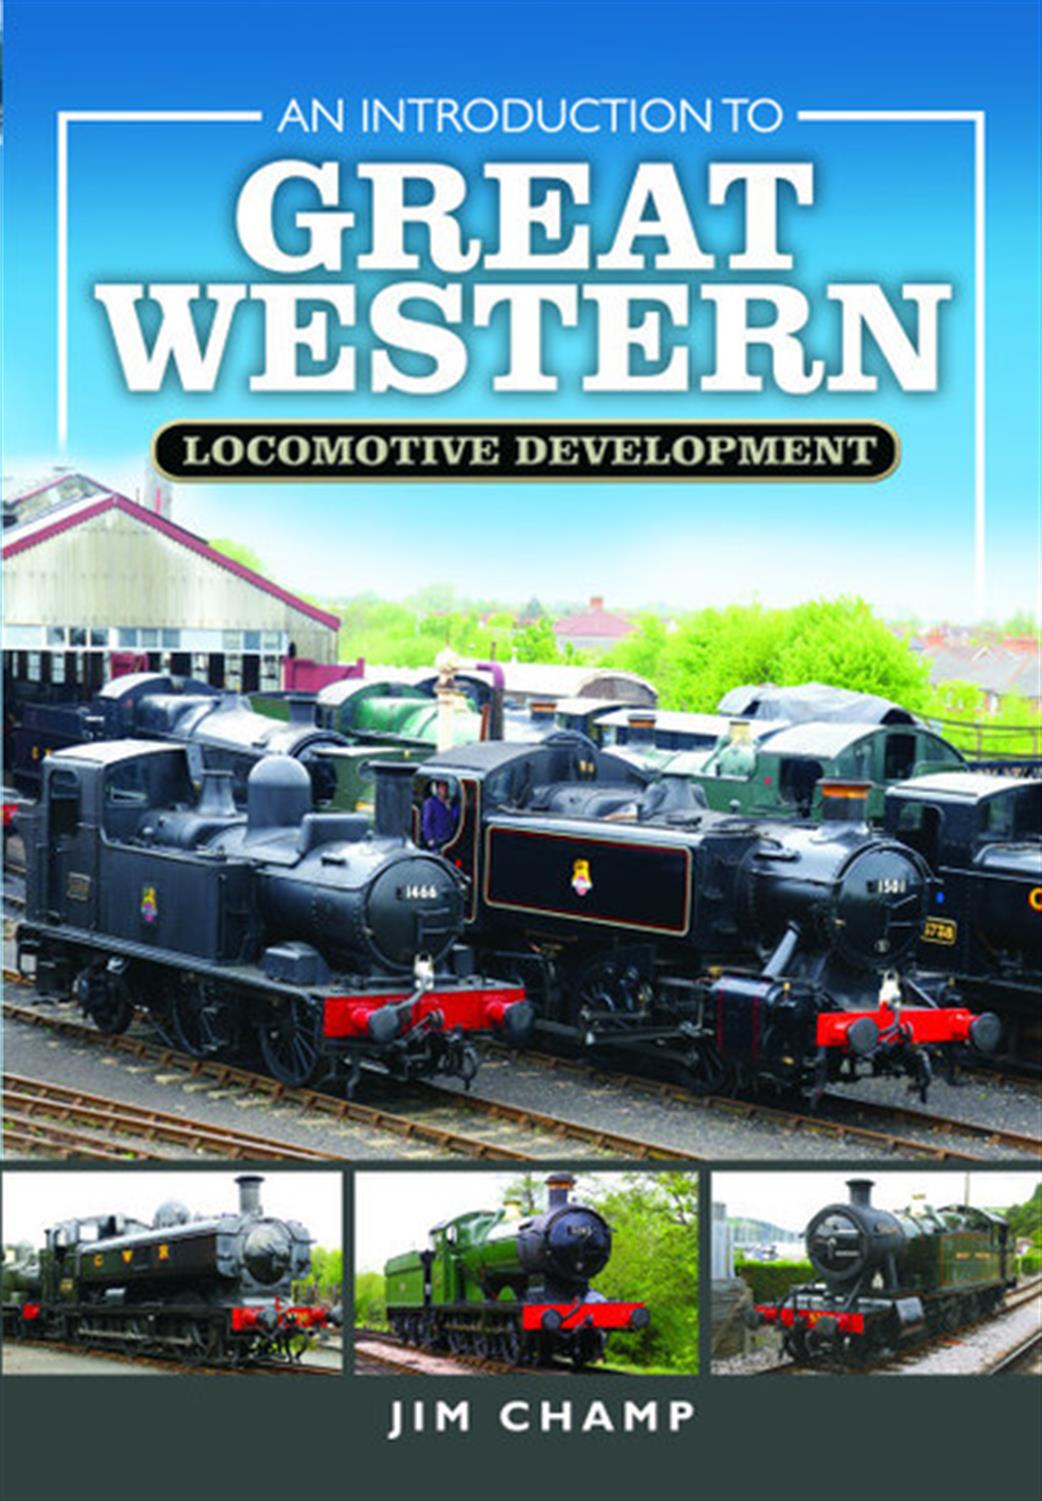 Pen & Sword  9781473877832 An Introduction to Great Western Locomotive Development by Jim Champ